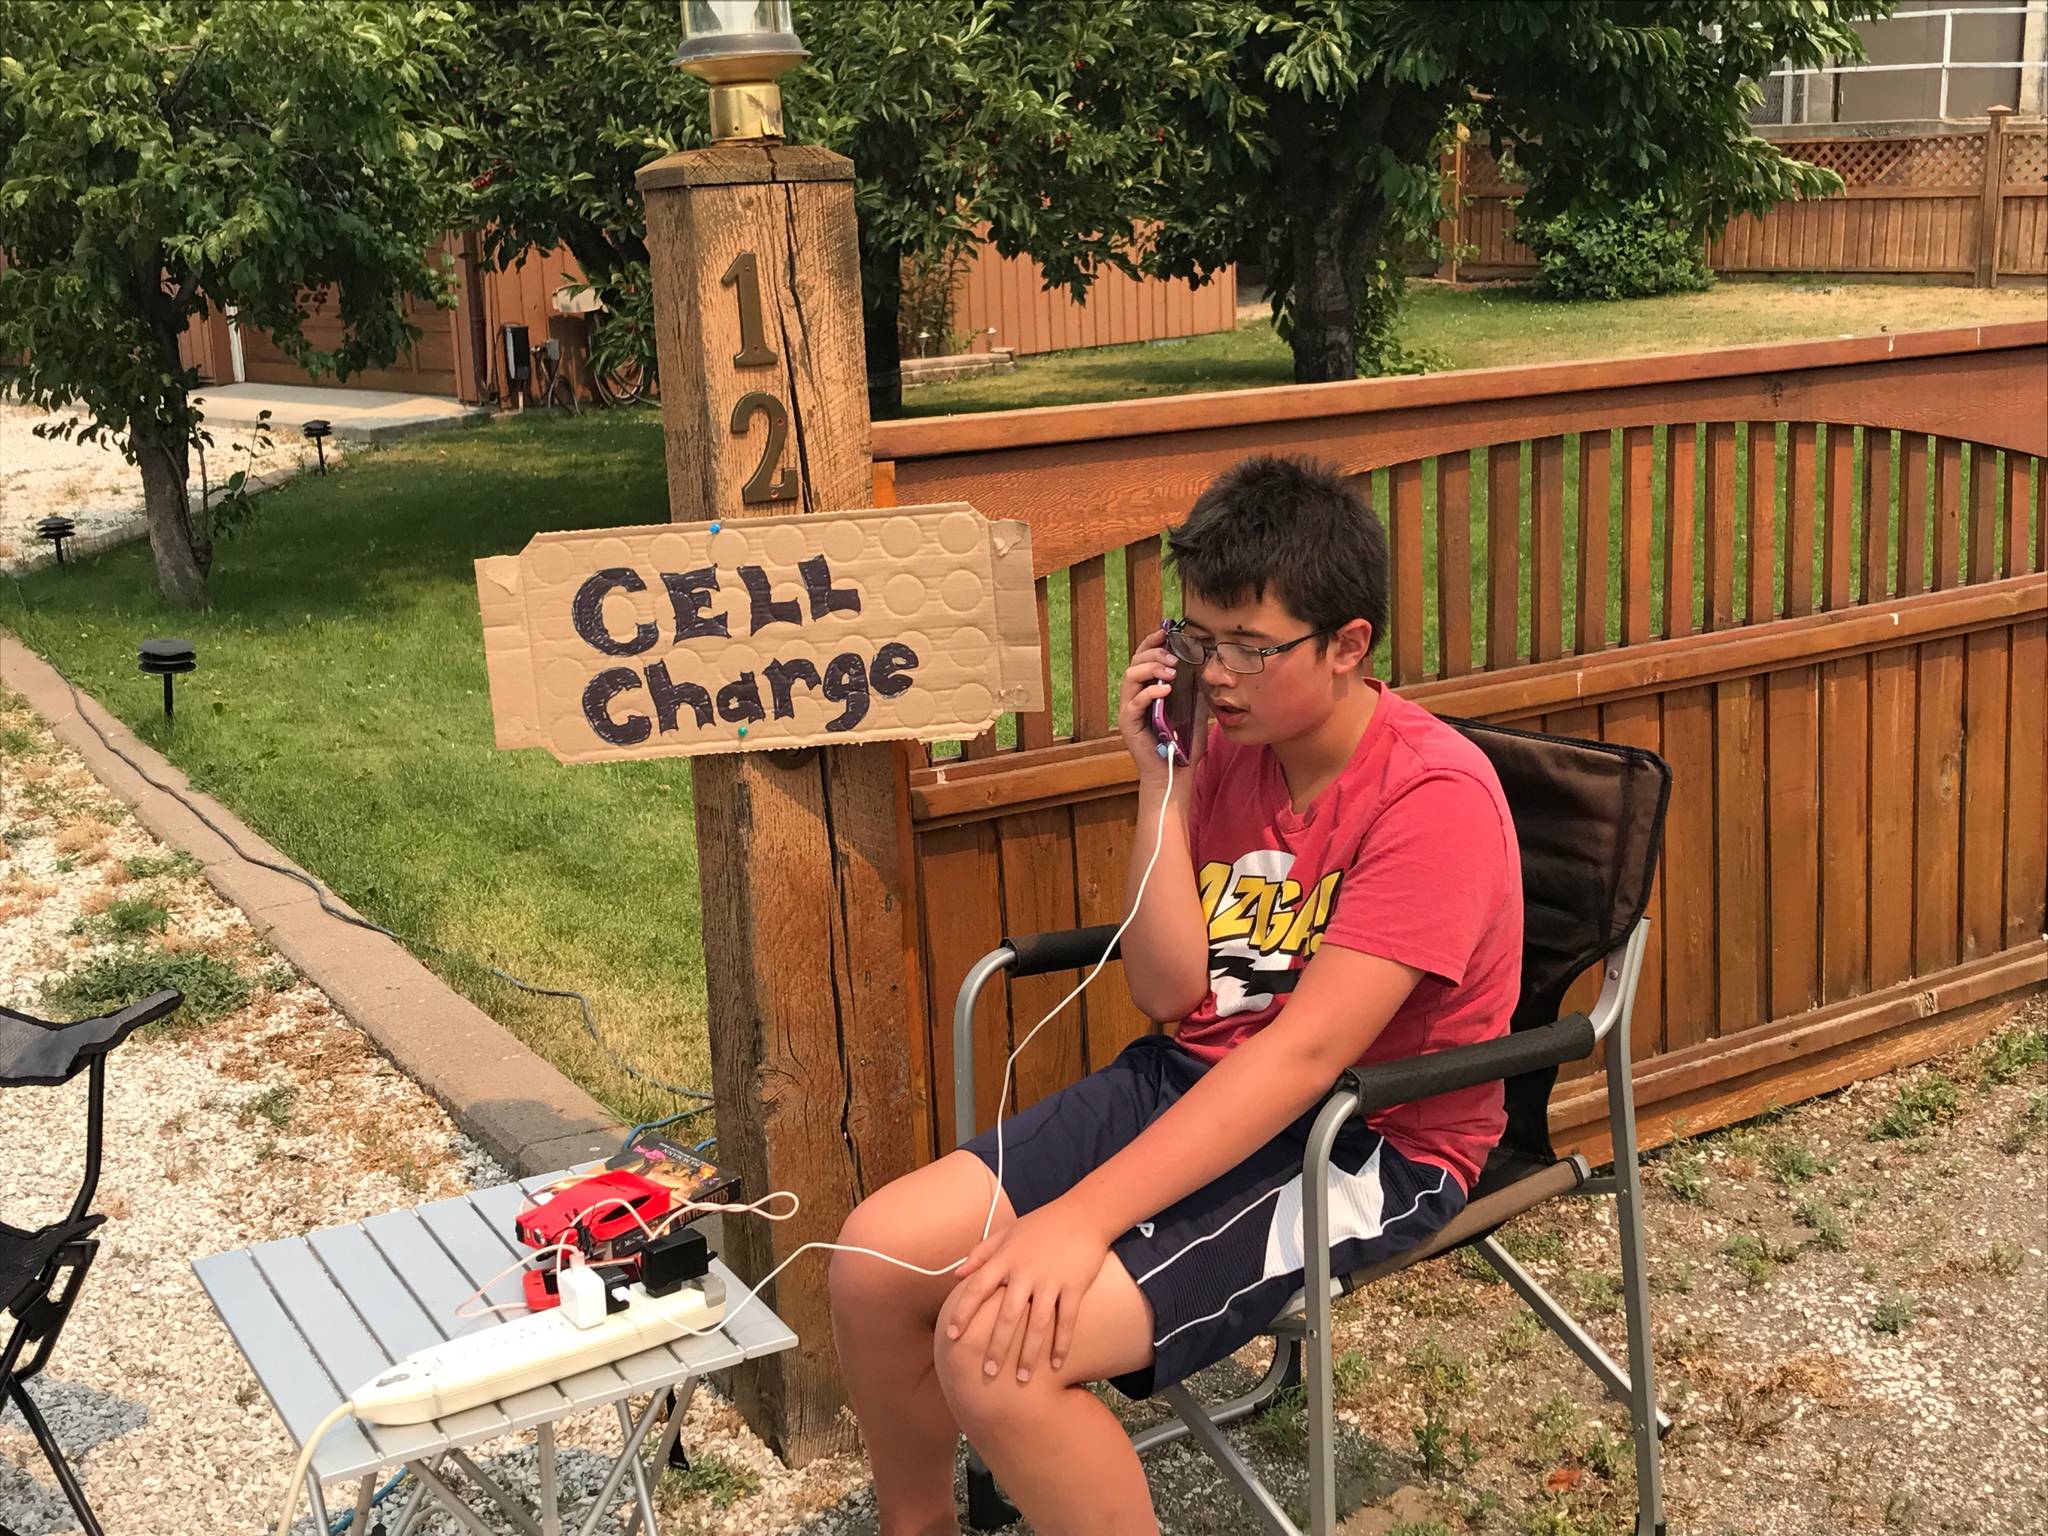 Ashcroft resident Jacob Aie made use of the cell charging station provided by Ken Gilpin on Saturday. In the absence of electricity, Ashcroft-Cache Creek editor Barbara Roden reported that Gilpin used a generator to provide his neighbours with a way to charge their cellphones.